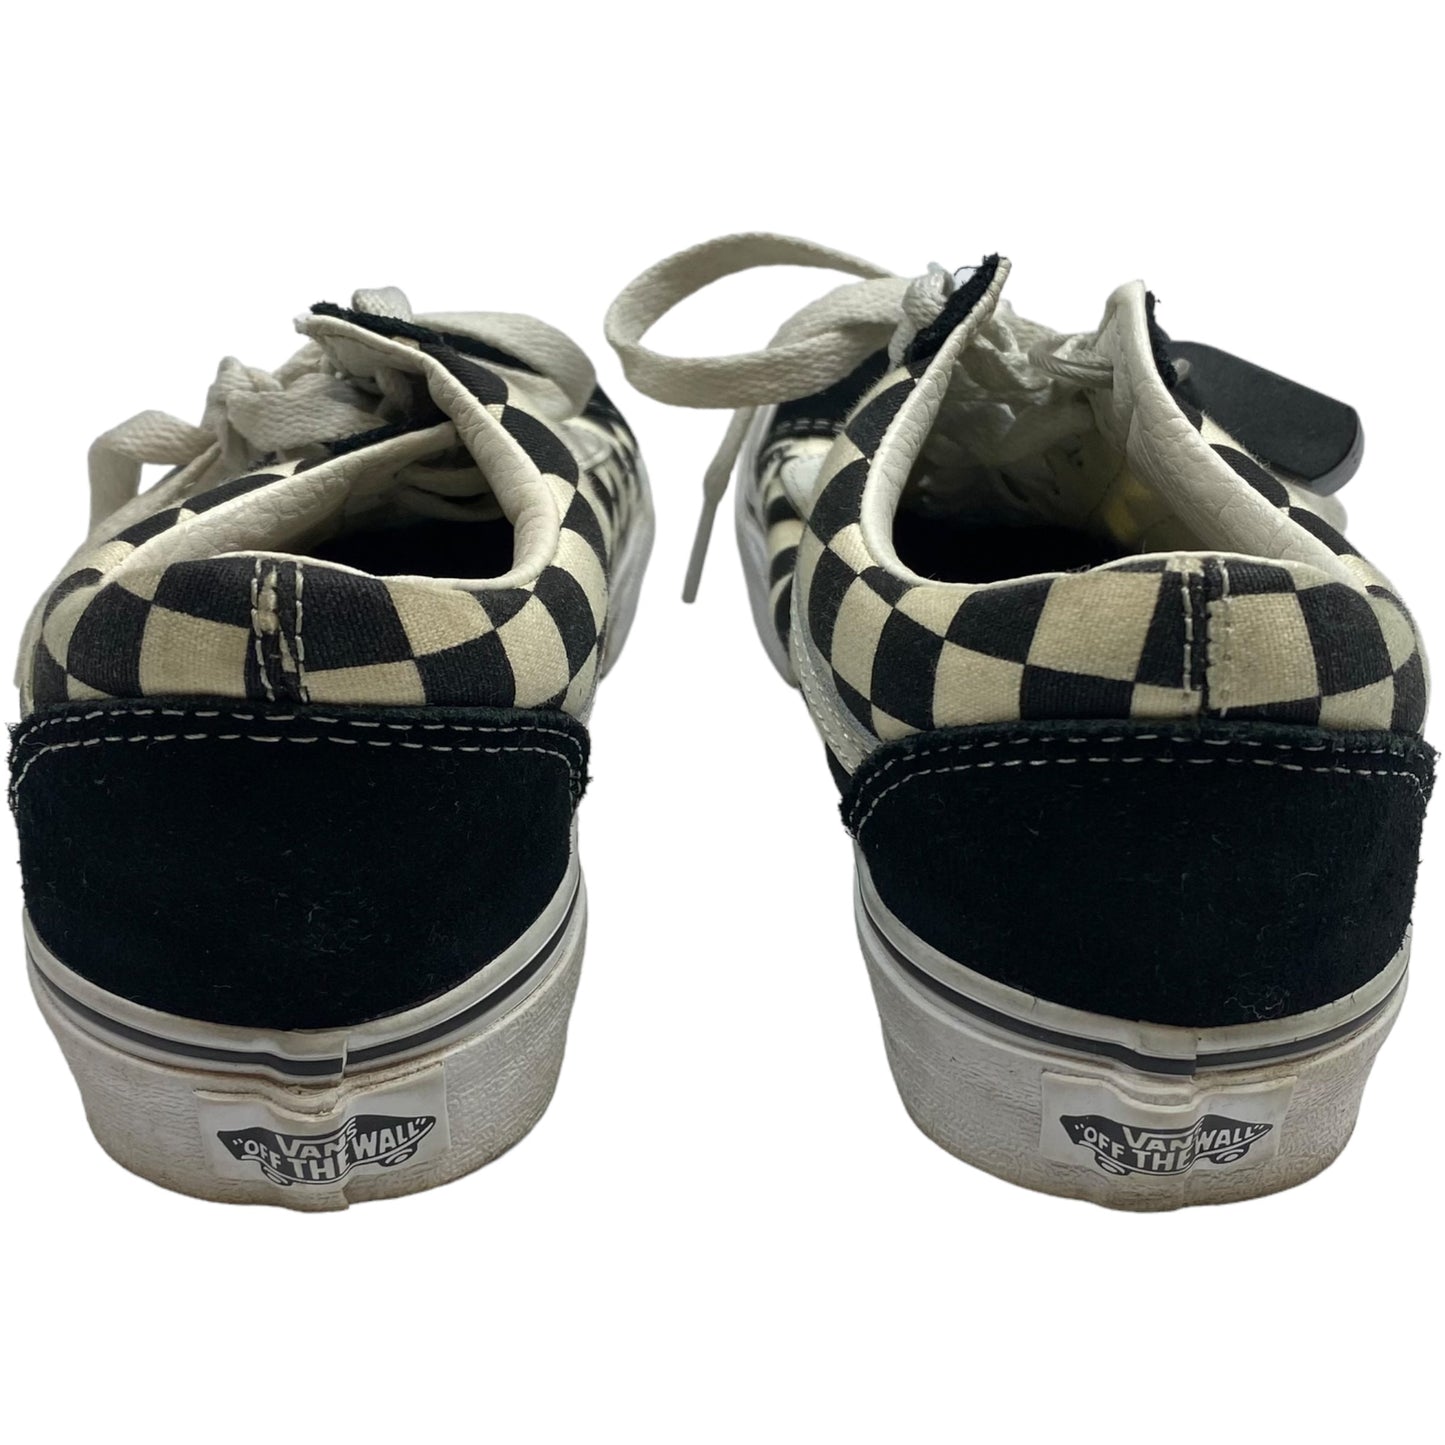 Shoes Sneakers By Vans  Size: 6.5